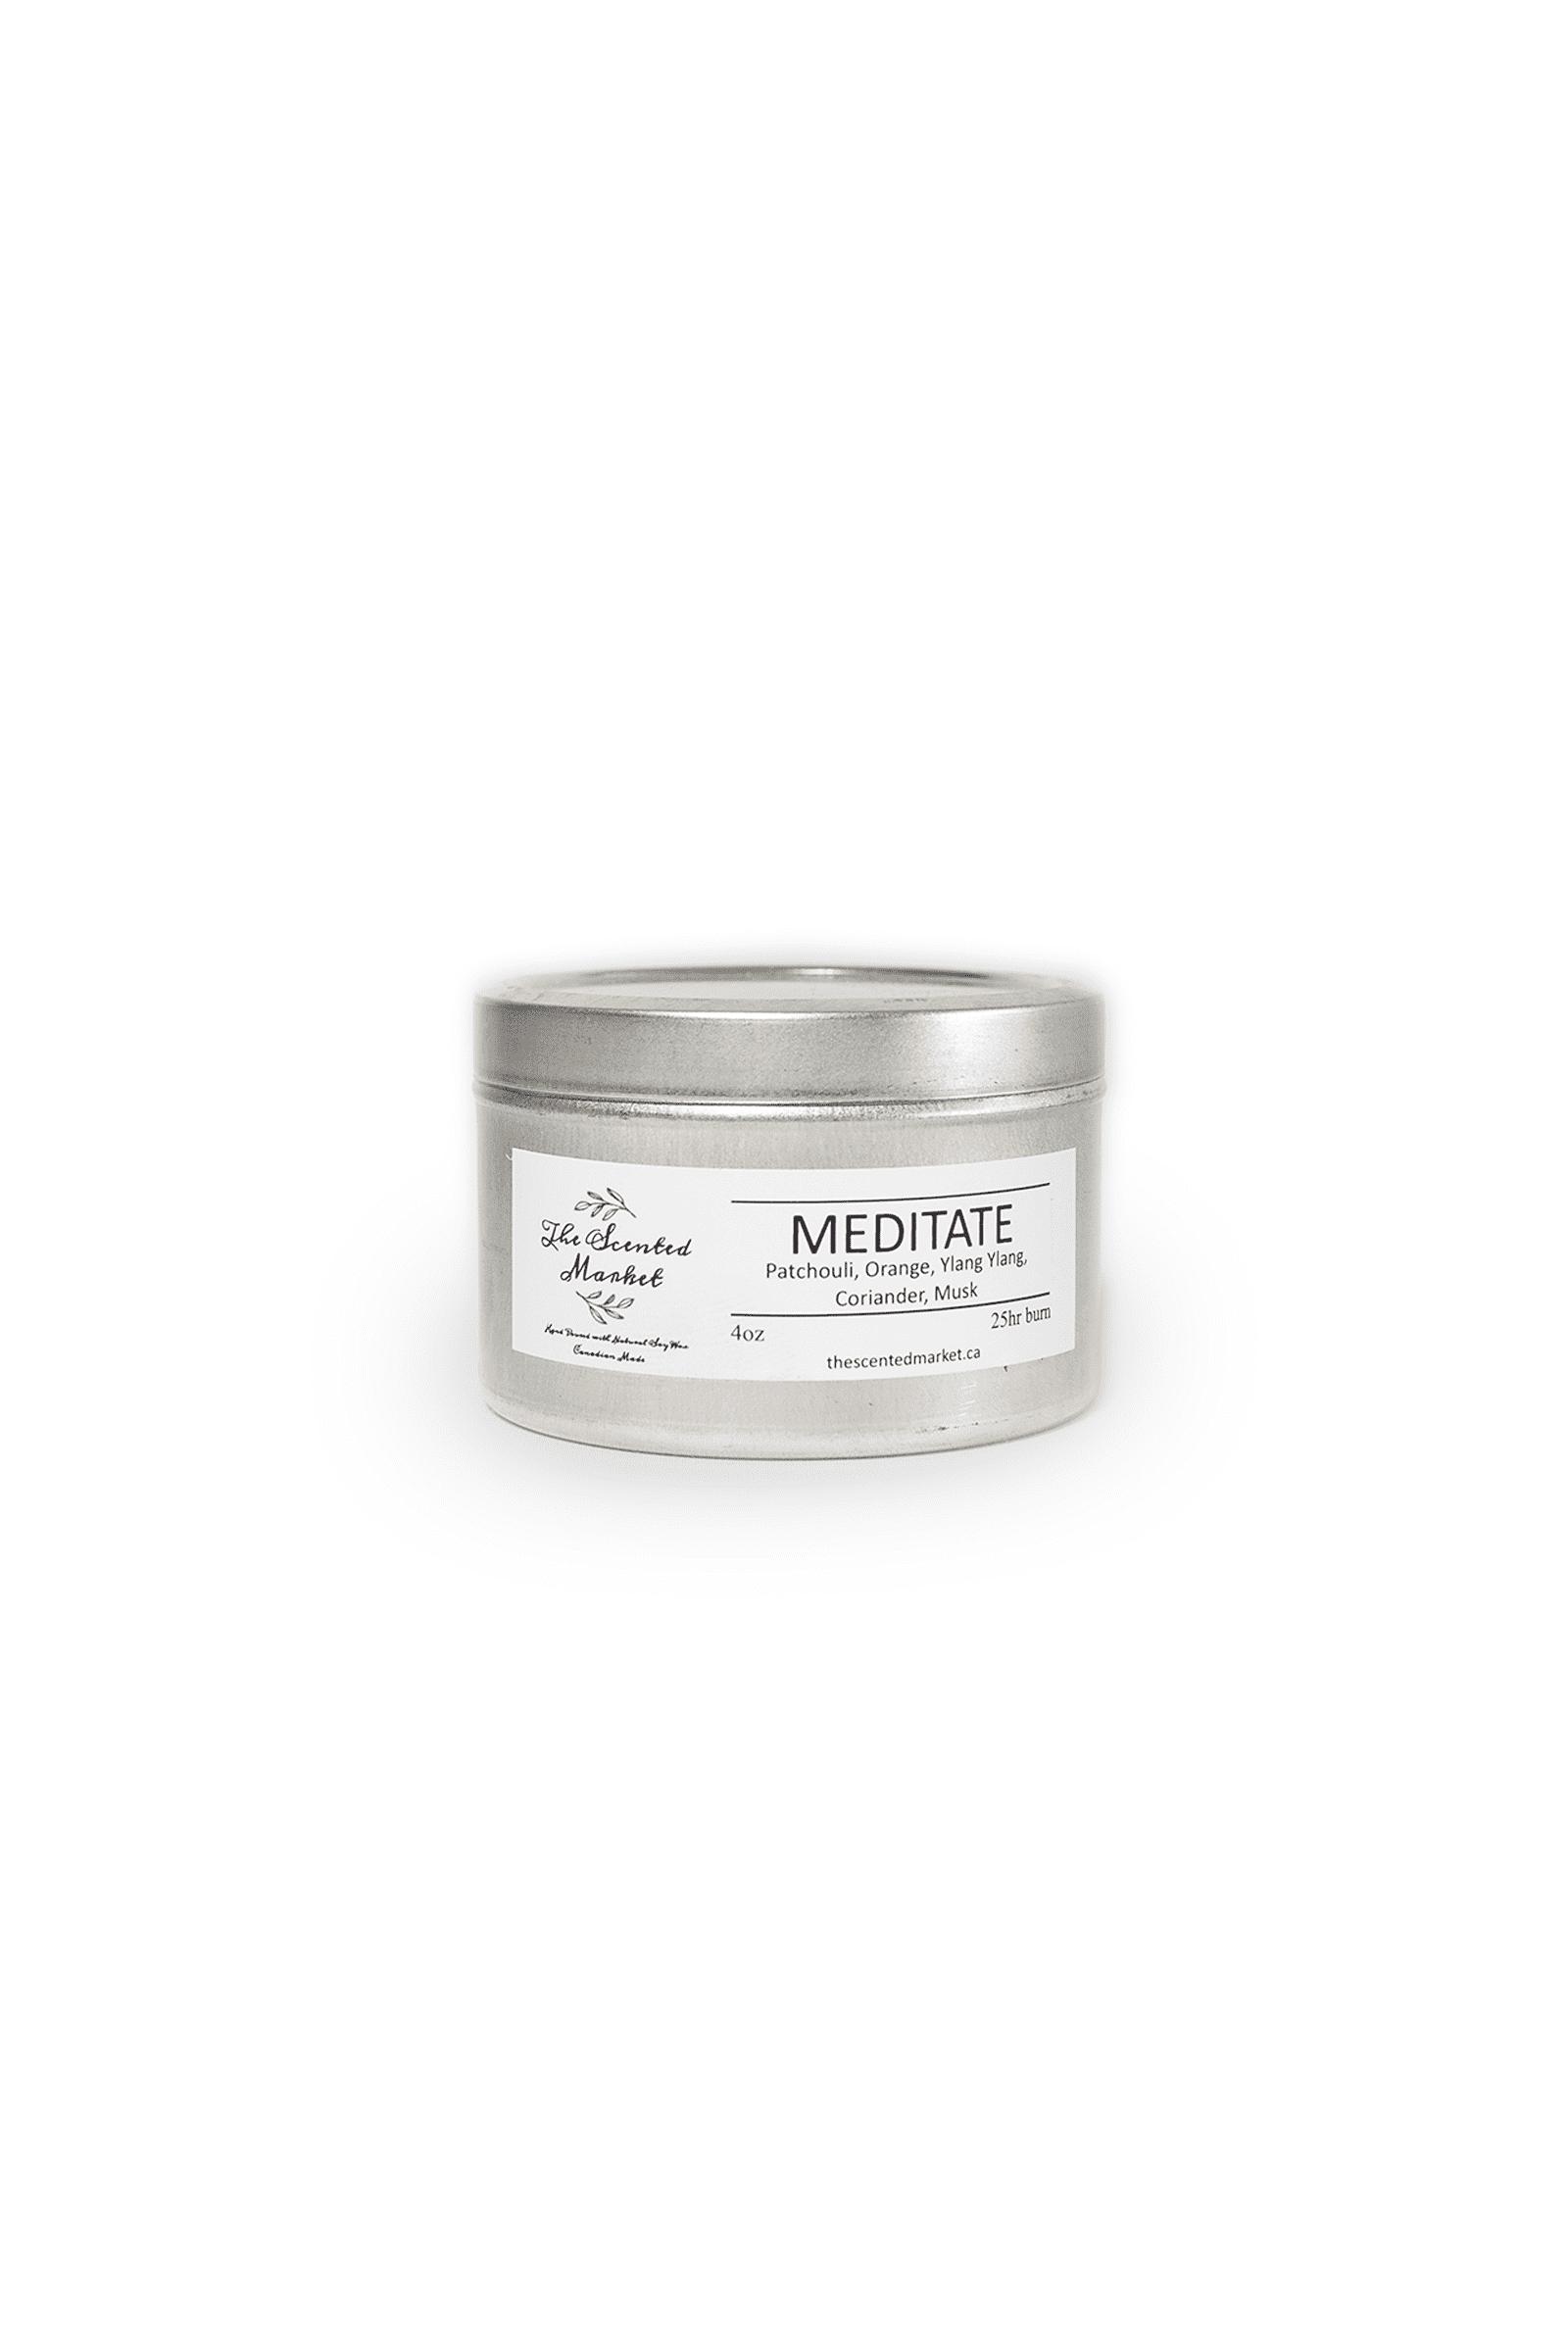 Meditate Essential Oil Scented Soy Wax Candle in a tin jar front view